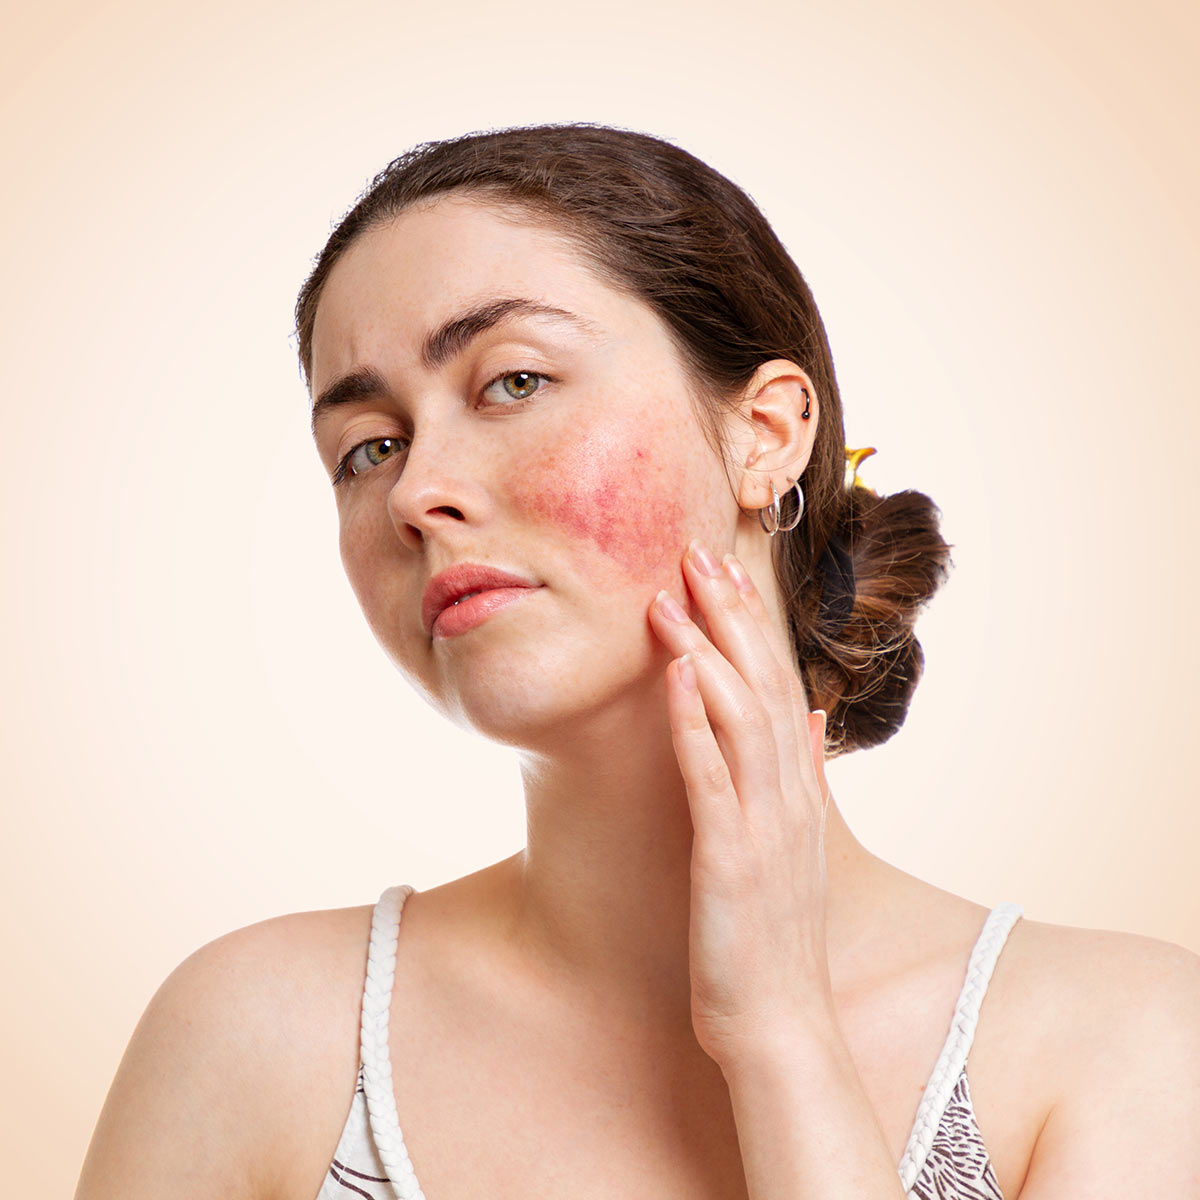 A young White woman in a tank top touches a patch of rosacea on her cheek.